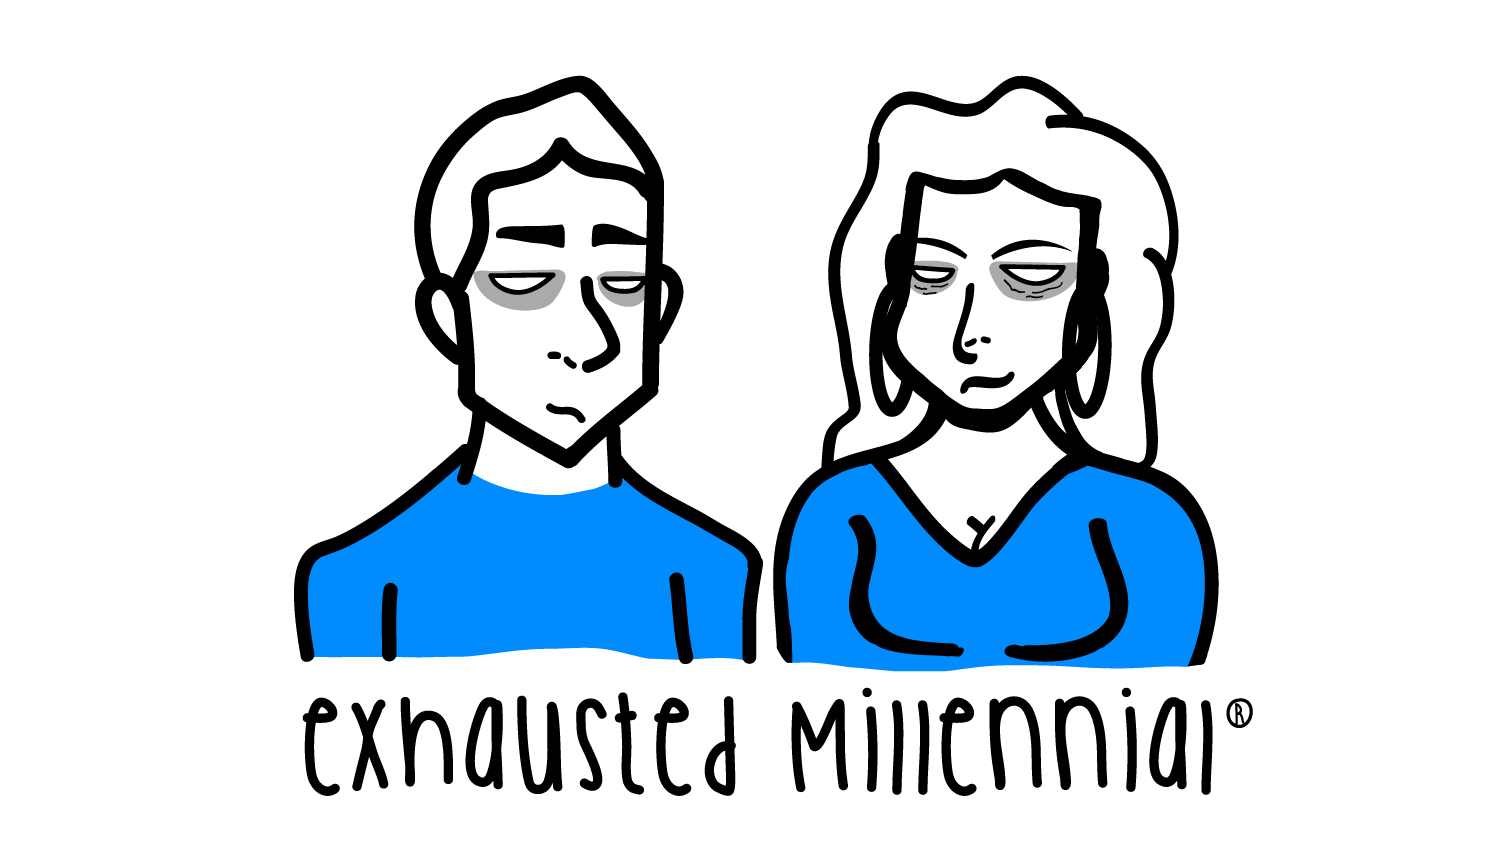 Exhausted Millennial